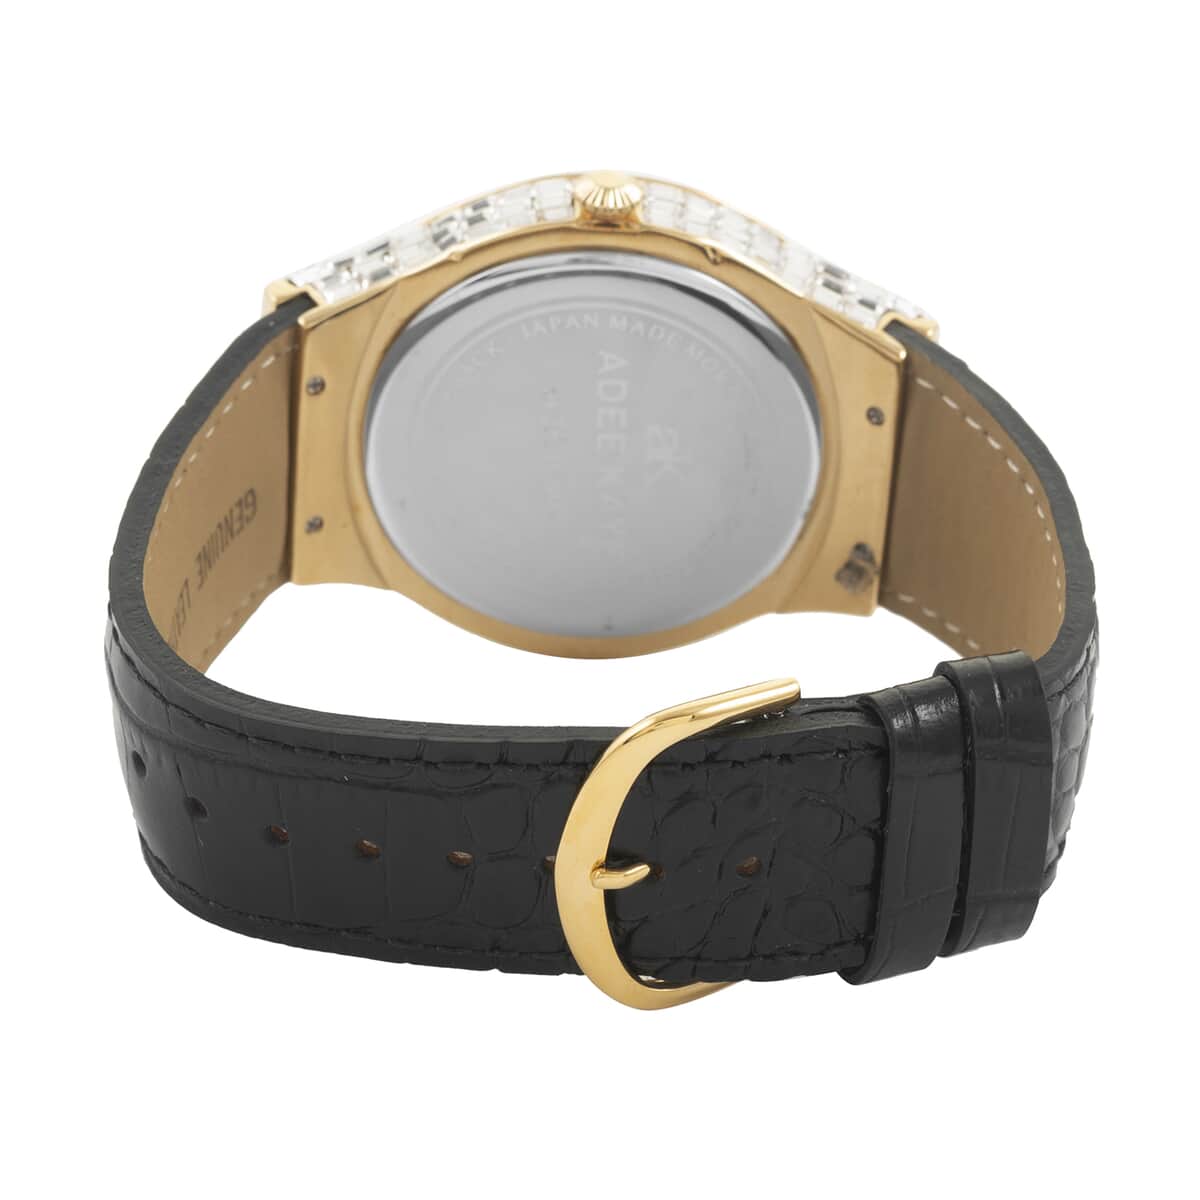 Adee Kaye Austrian Crystal Japan Quartz Movement Goldtone Dial Watch in Black Leather Band (26 mm) | Best Watch for Women | Designer Women's Wrist Watch image number 3